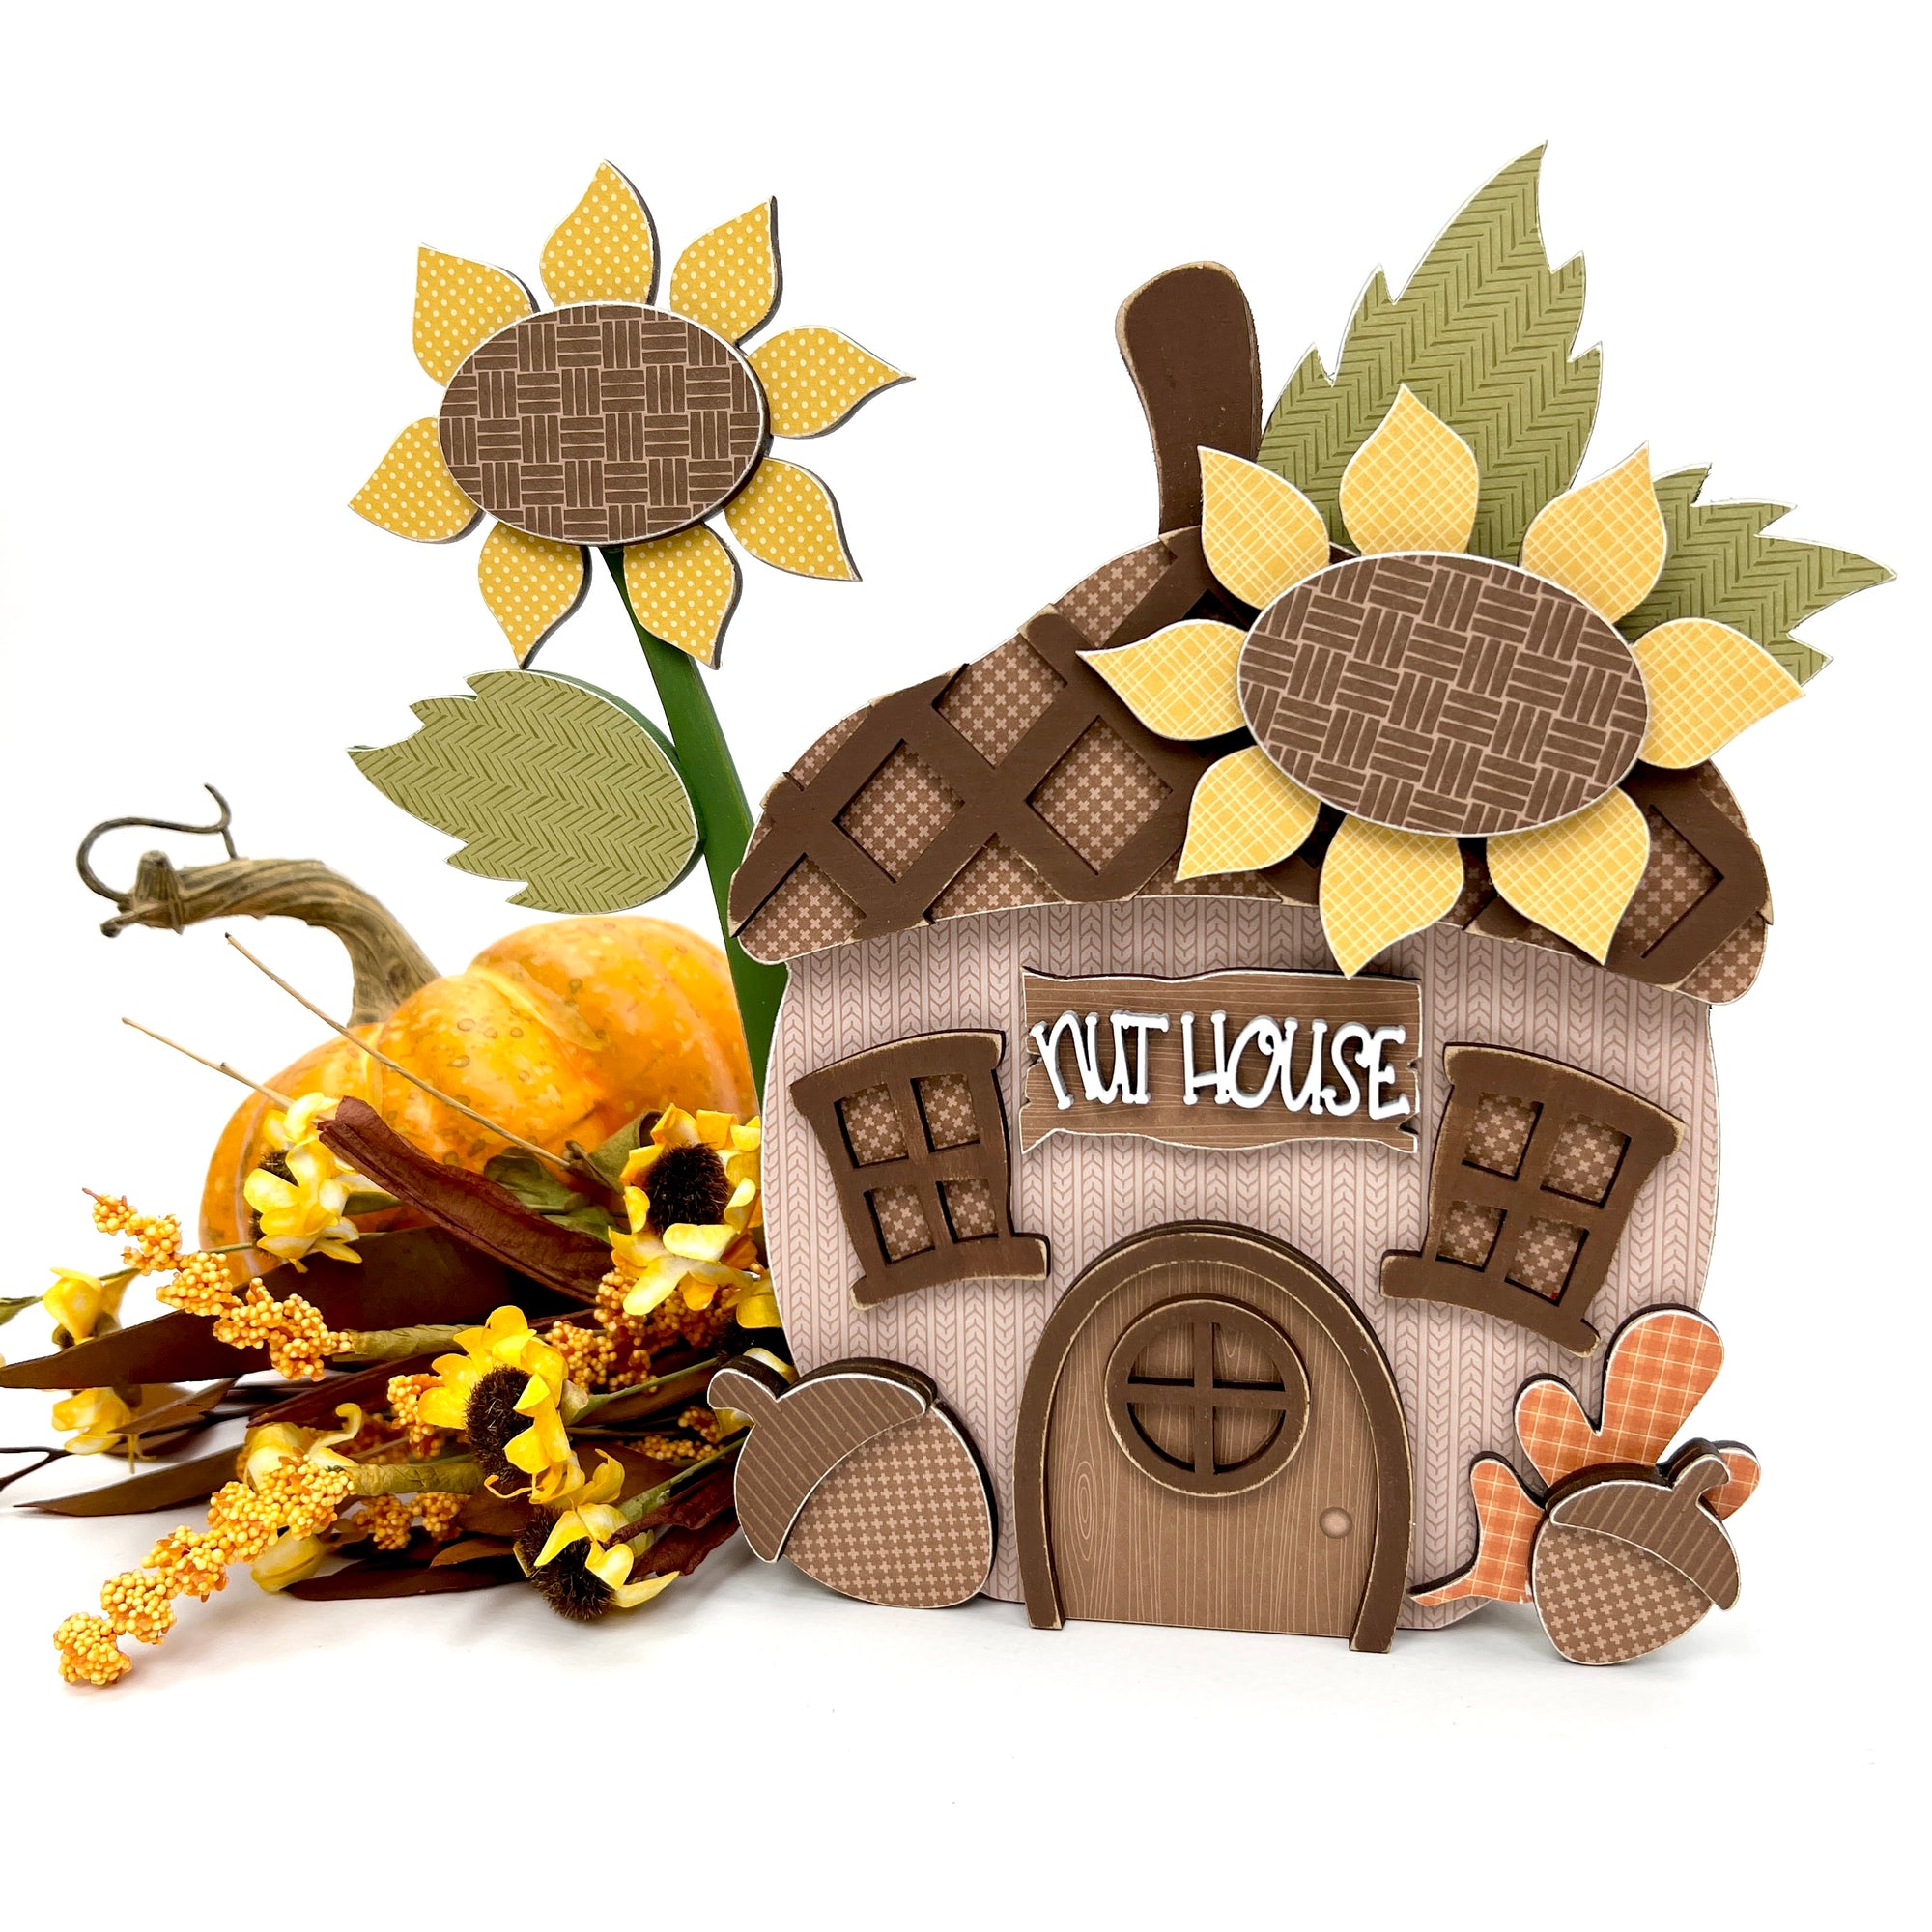 Wood acorn and sunflower decoration craft kit. Acorn is designed to look like a house. 